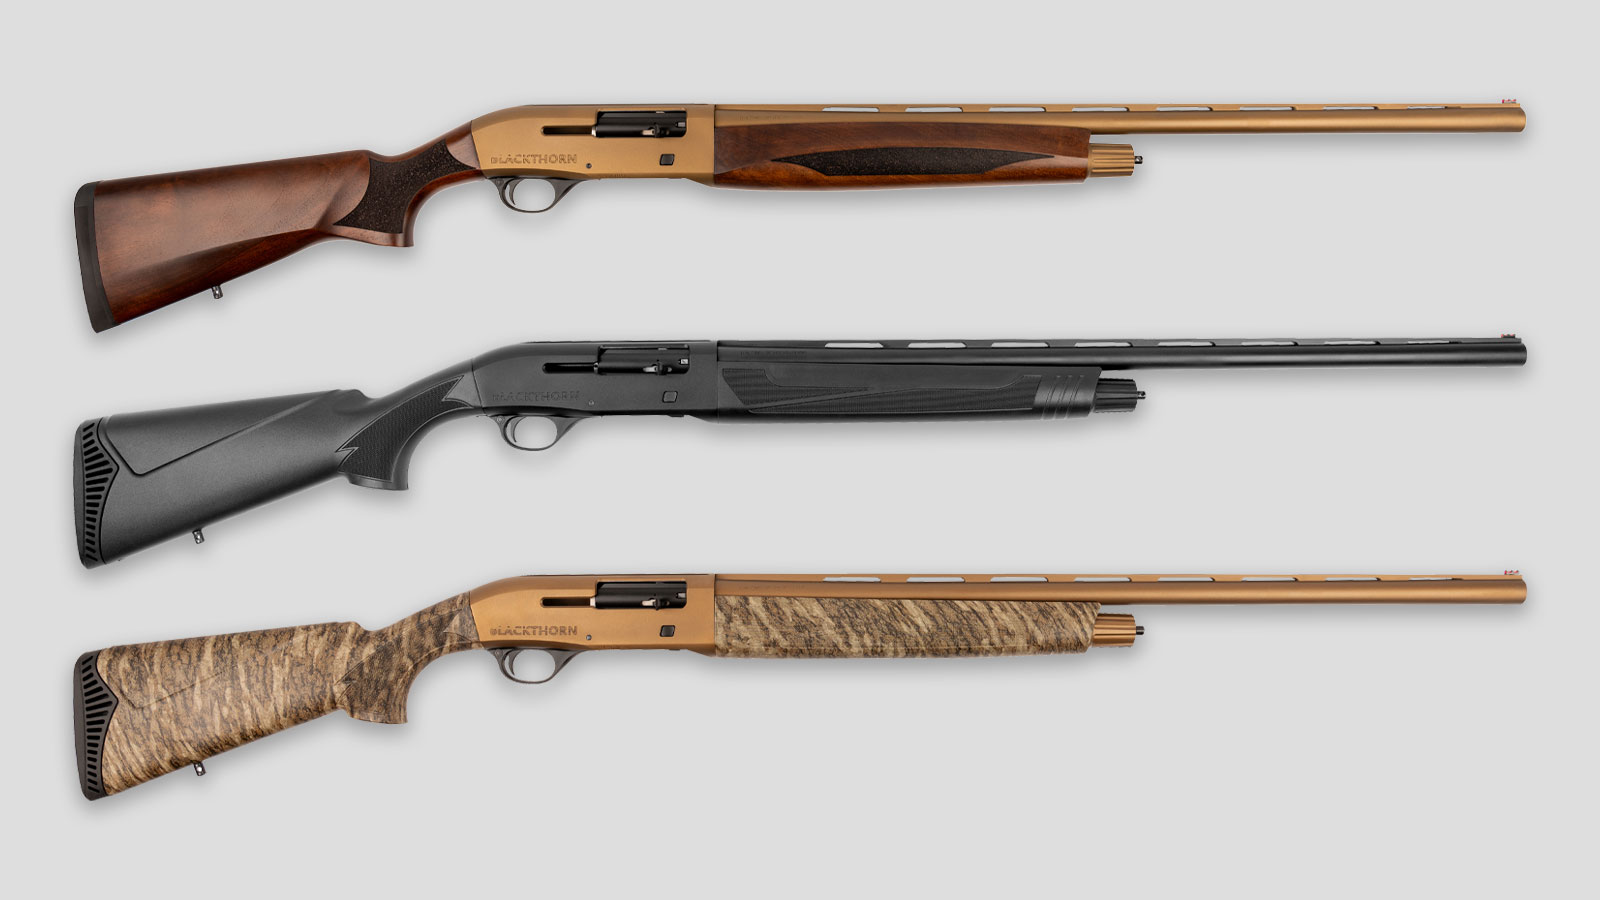 All three models of the EB Arms semi-automatic shotgun (Black Synthetic, Bronze Camo, and Bronze Walnut) on a grey background.